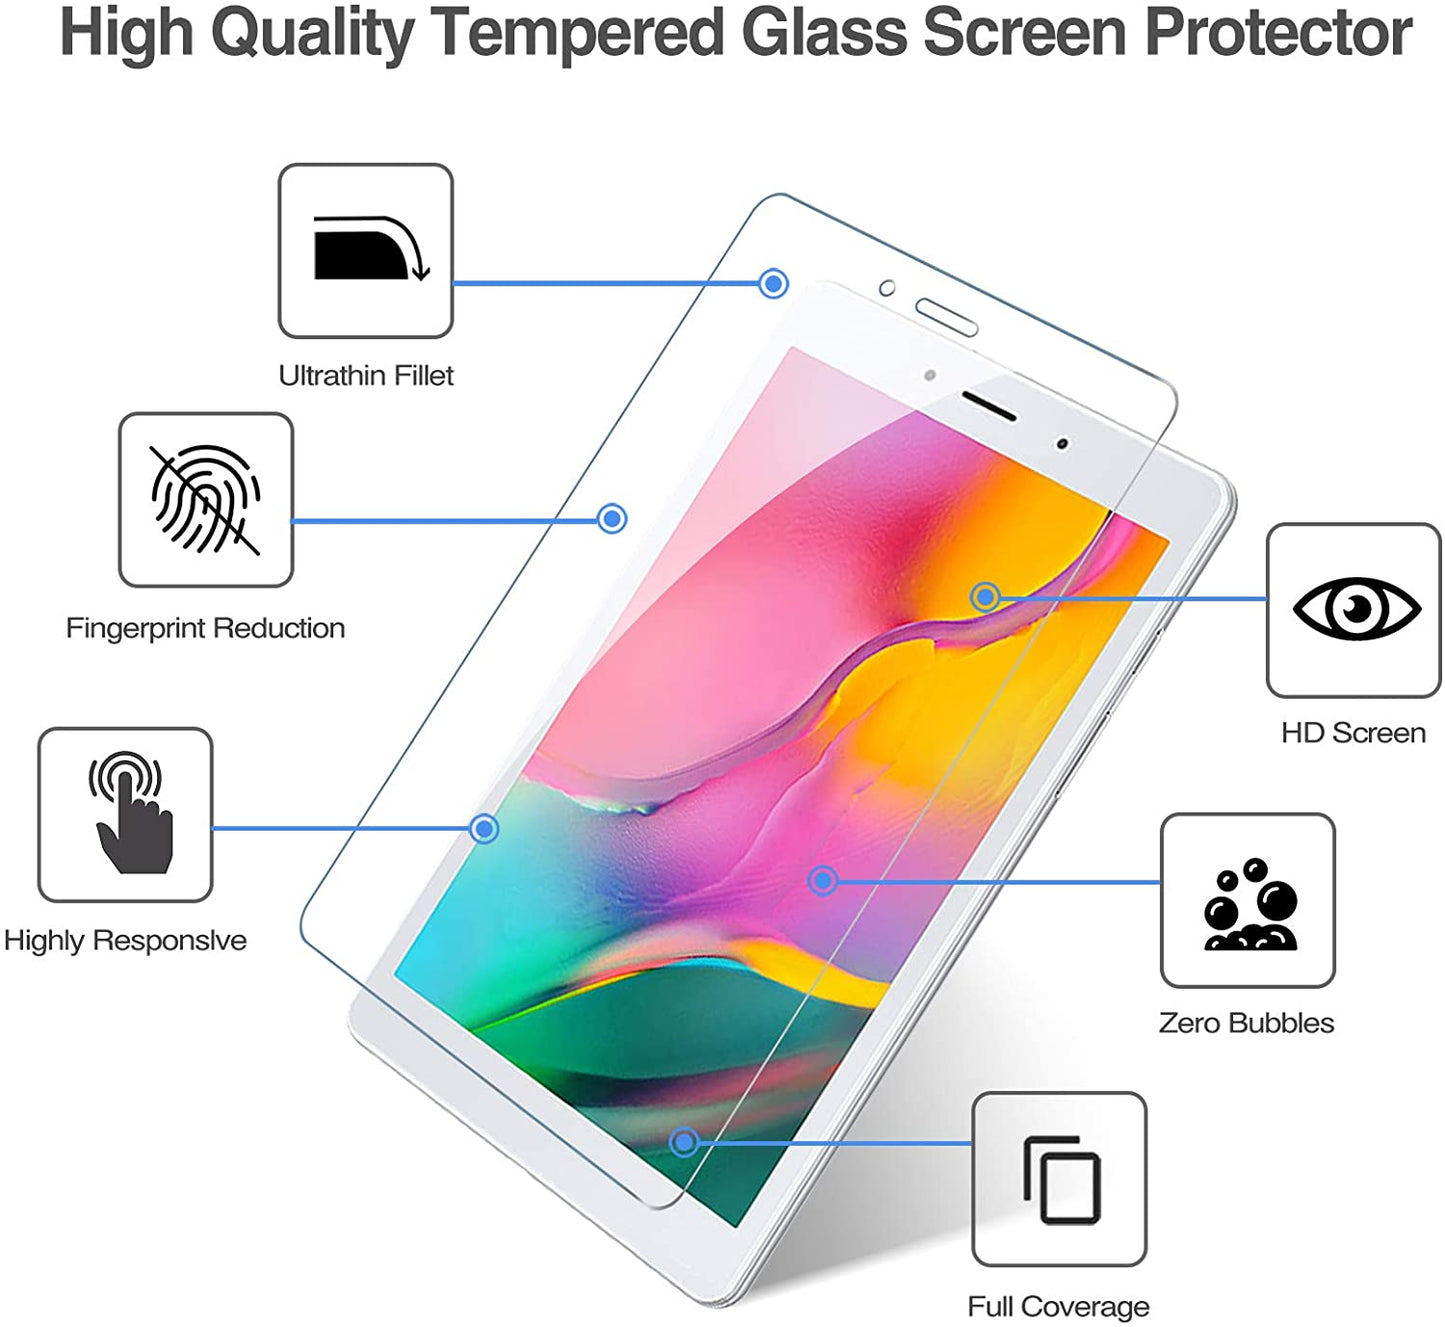 (2 Pack) Galaxy Tab A 8.0" 2019 Tempered Glass Screen Protector | Yapears